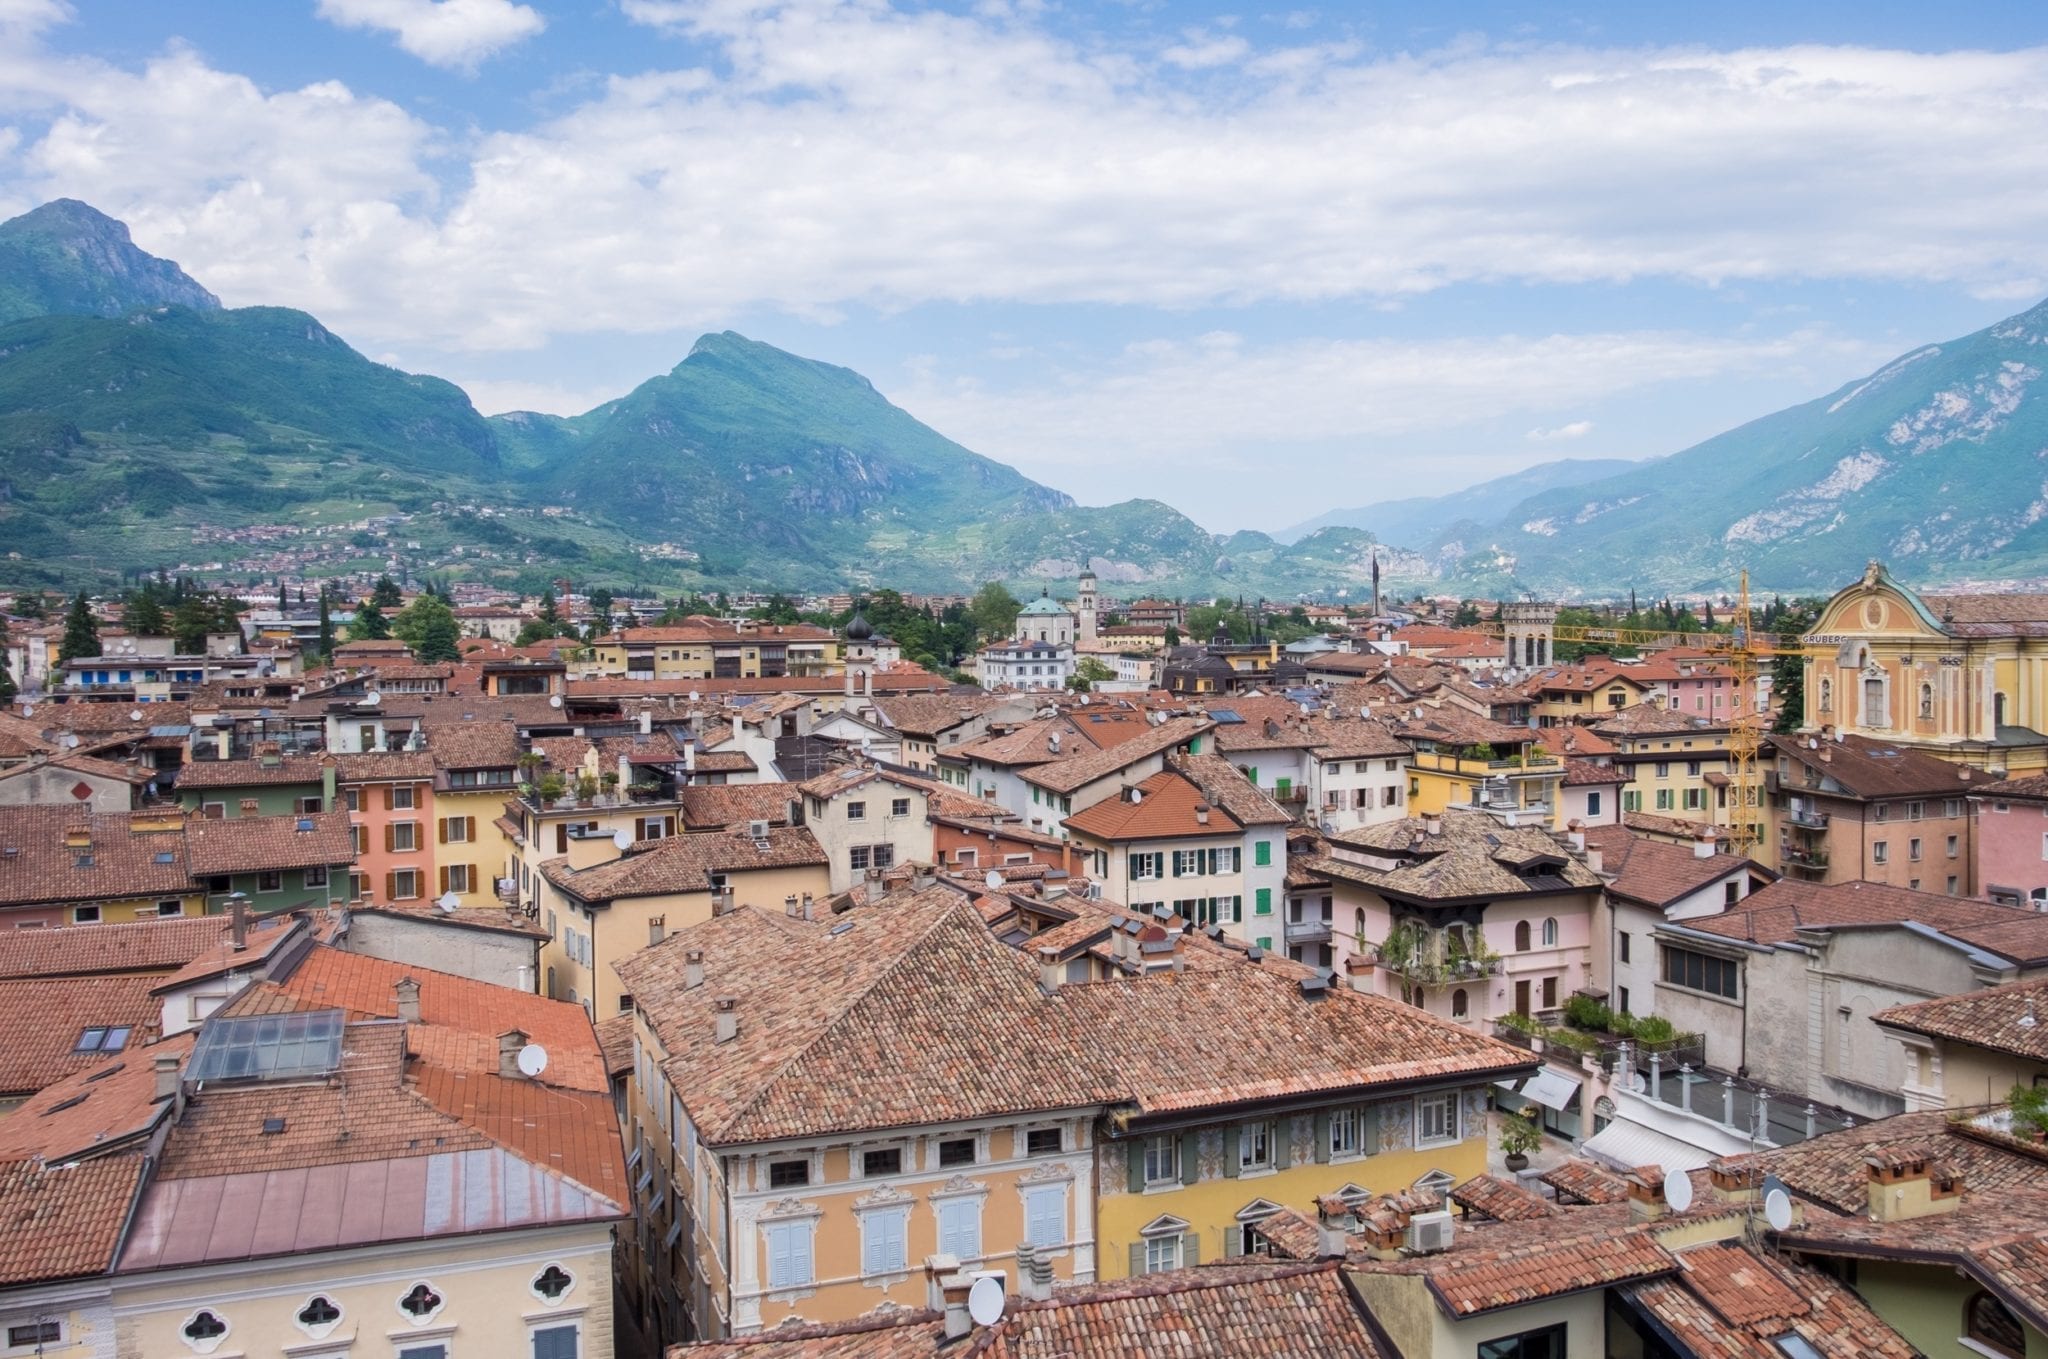 Viewing from a point above, a city of brown terra-cotta rooftops spreads over the expanse. In the distance, green mountains rise up against a blue and white-streaked sky. Riva del Garda, Italy